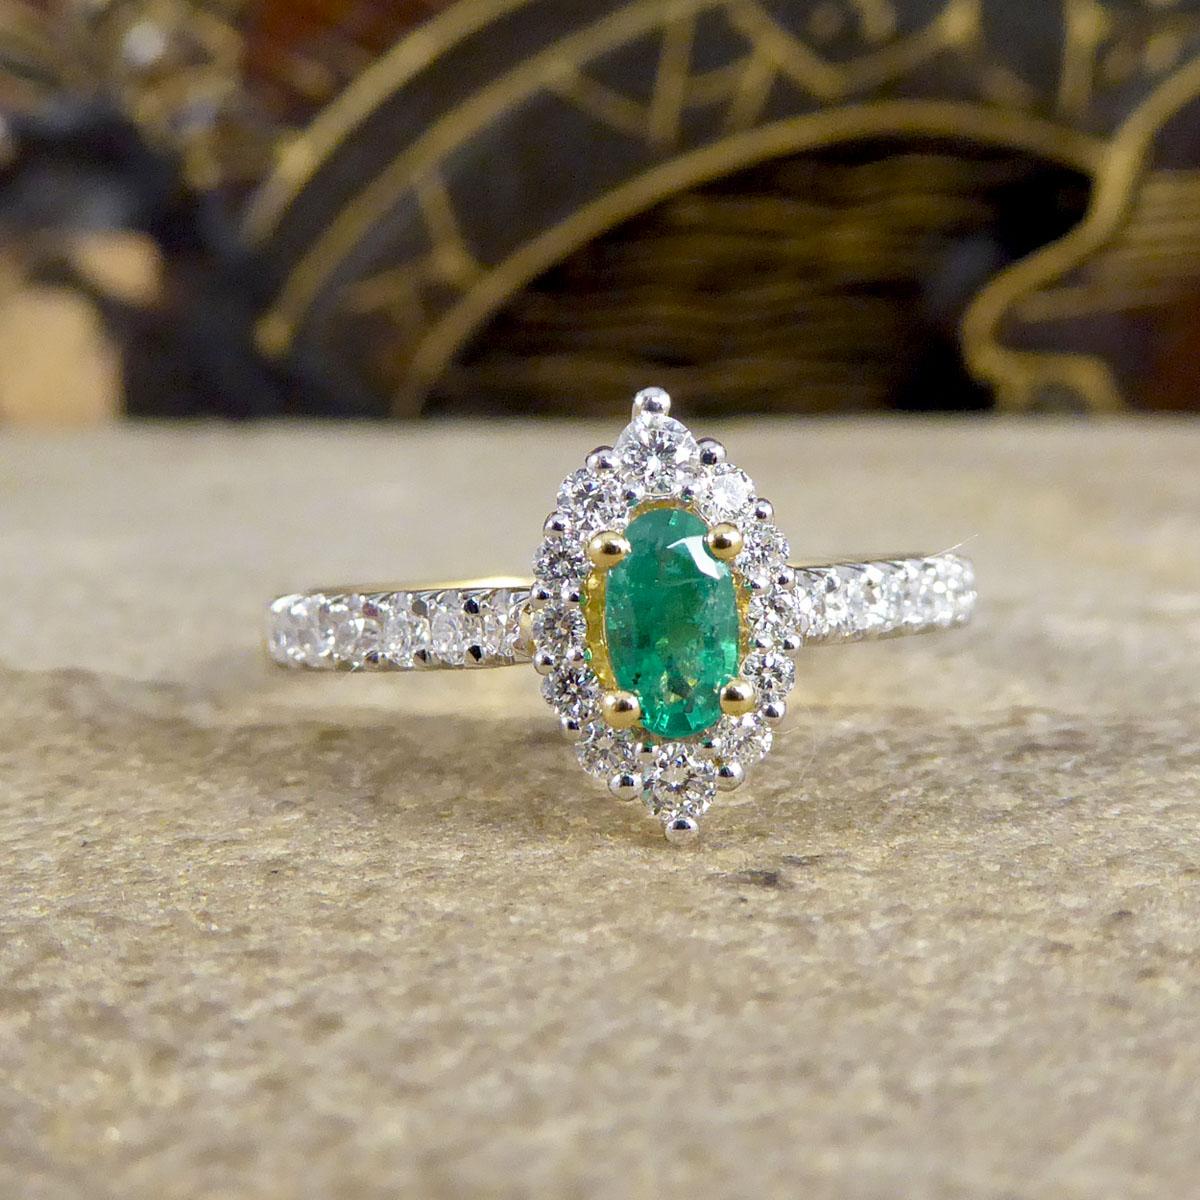 This ring features a beautiful and bright oval cut Emerald in the centre weighing 0.23ct with a marquise shaped halo surround of round cut Diamonds. The stone have all been set in a four claw setting with the Diamonds running all down either